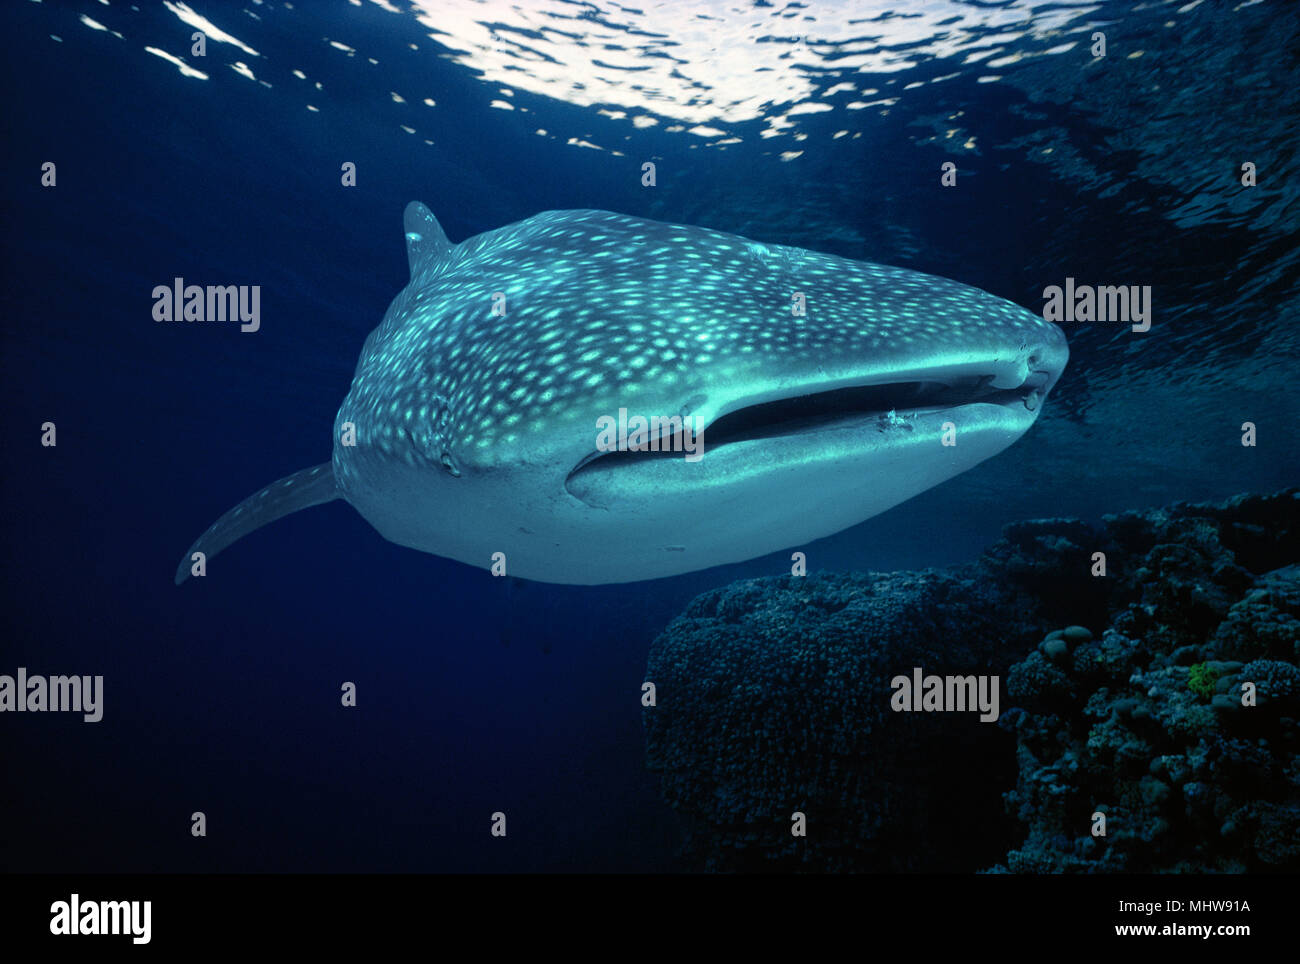 Whale Shark (Rhincodon typus) feeding on plankton, Cocos Island, Costa Rica - Pacific Ocean. Image digitally altered to remove distracting or to add m Stock Photo